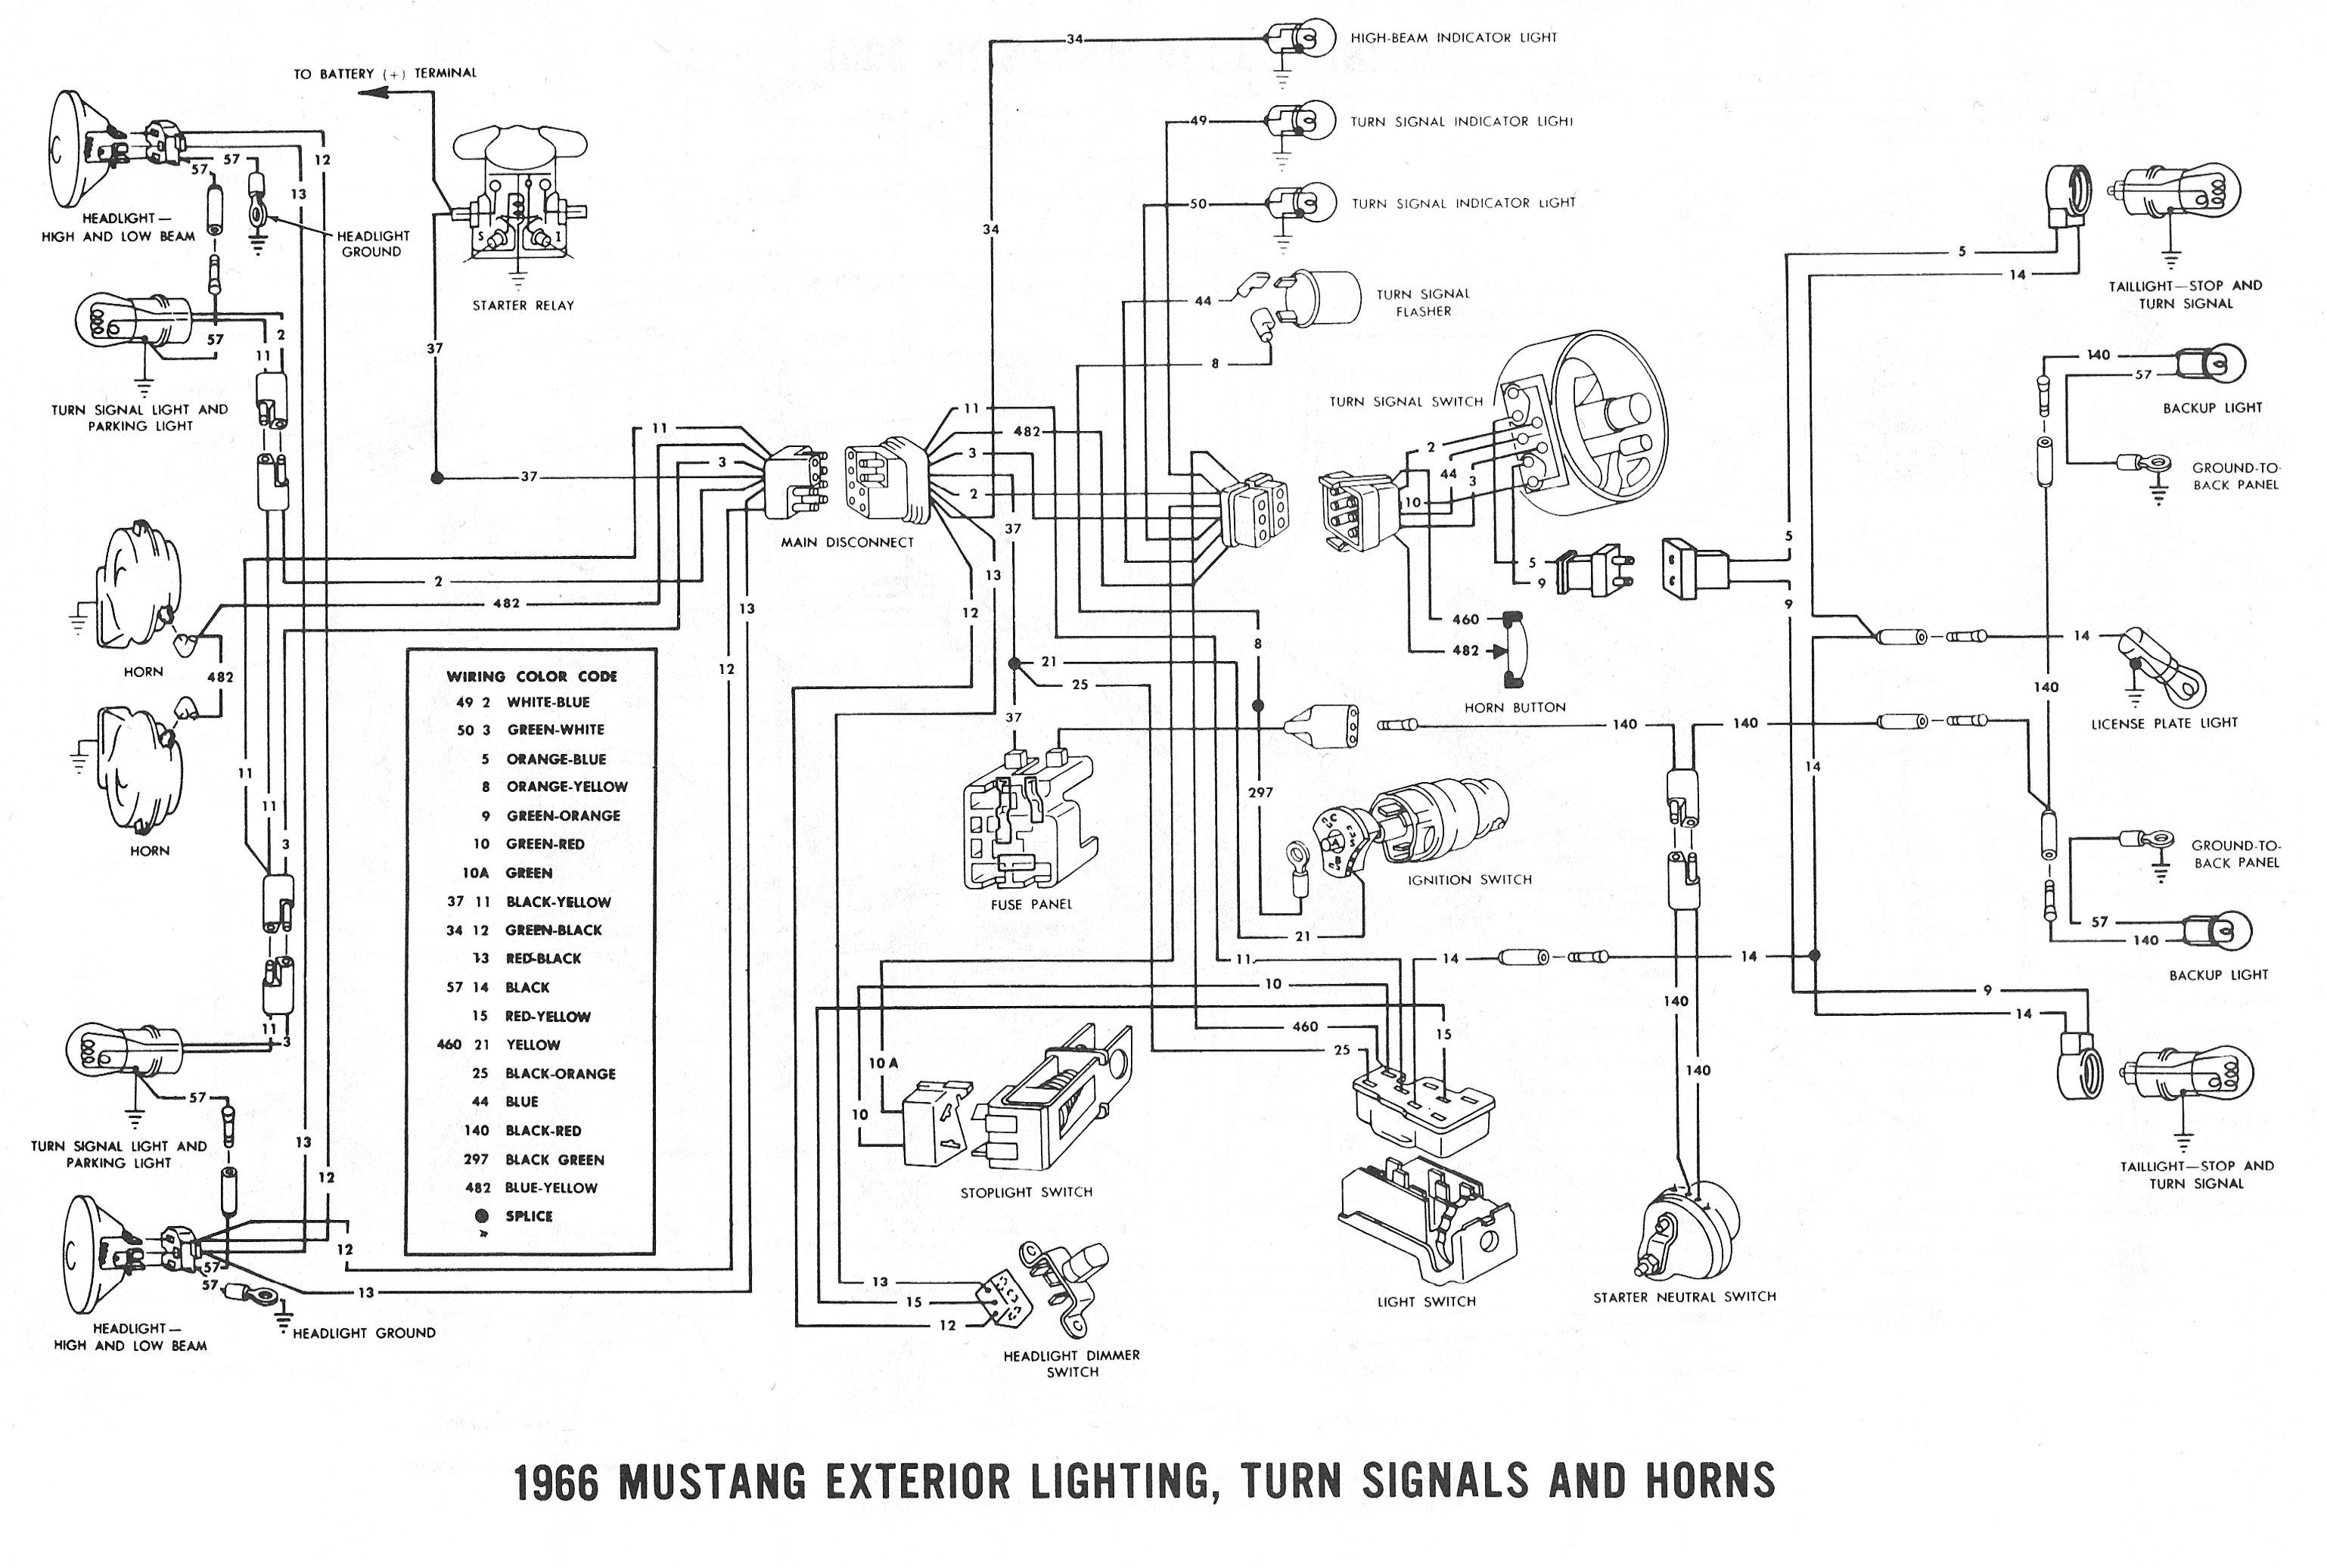 67 mustang turn signal switch wiring diagram simplified shapes 1967 rh zookastar 1968 Ford Mustang Wiring Diagram Turn Signal Switch Wiring Diagram